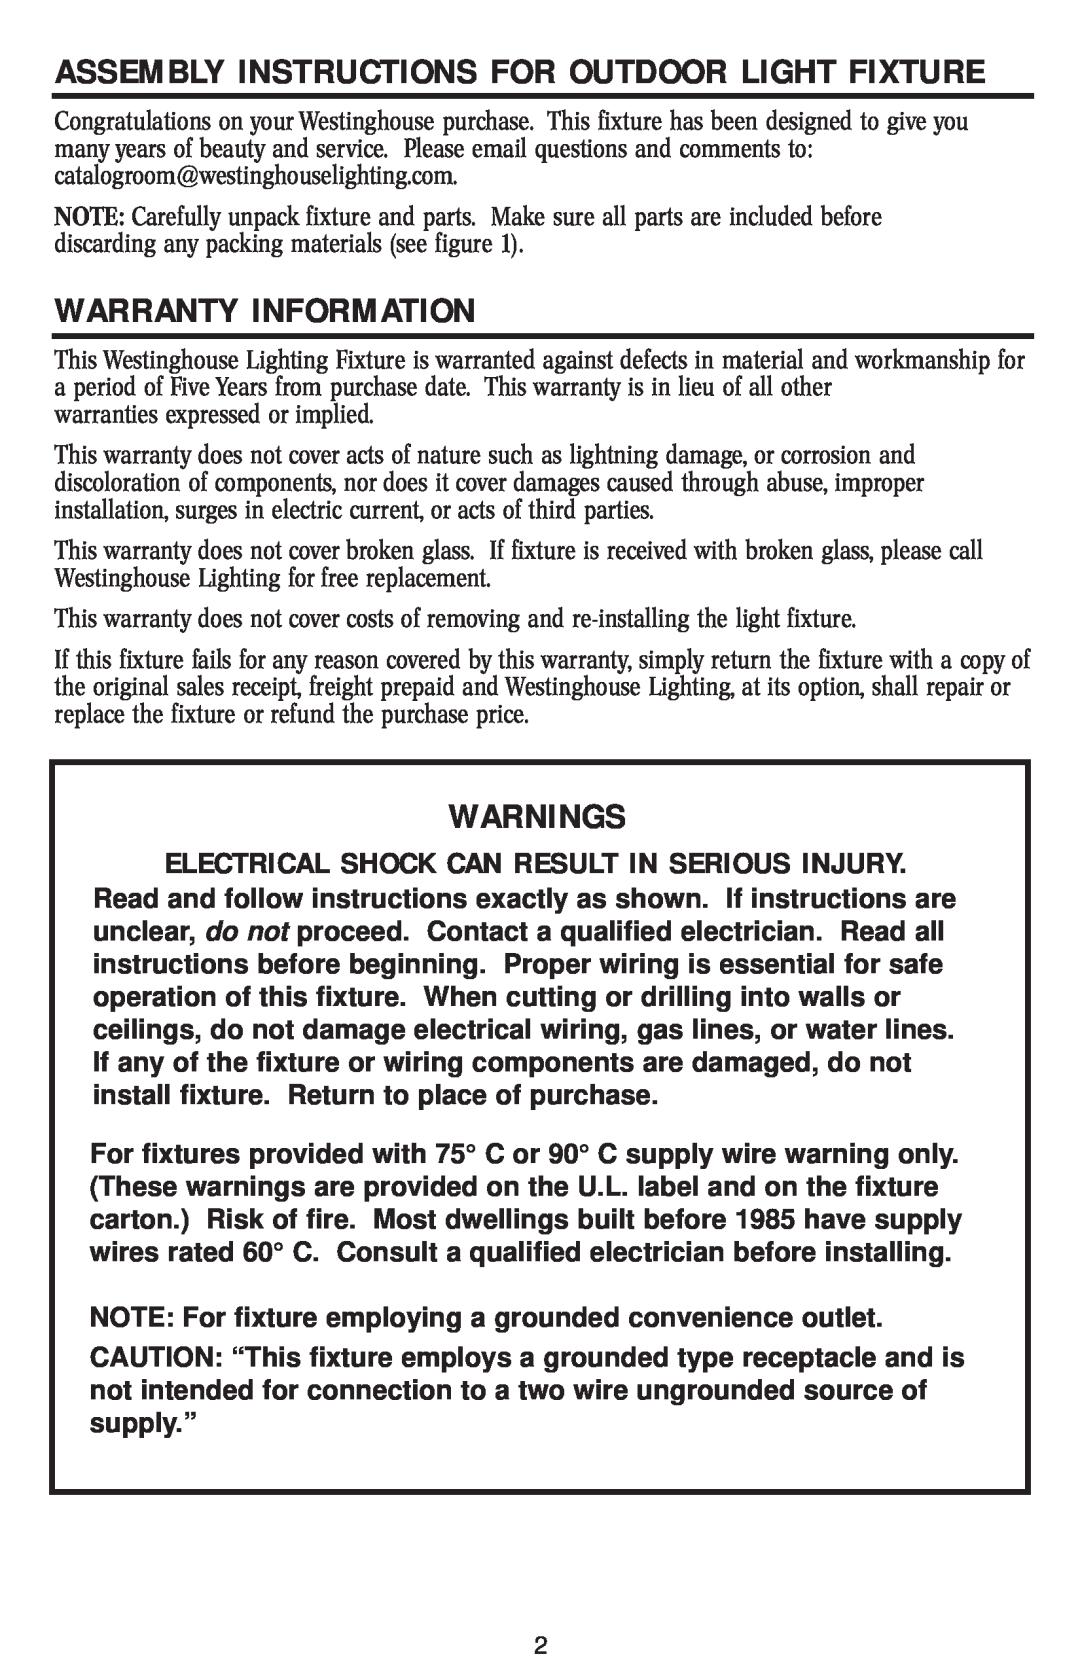 Westinghouse W-031 1/15/04 owner manual Warranty Information, Warnings, Assembly Instructions For Outdoor Light Fixture 